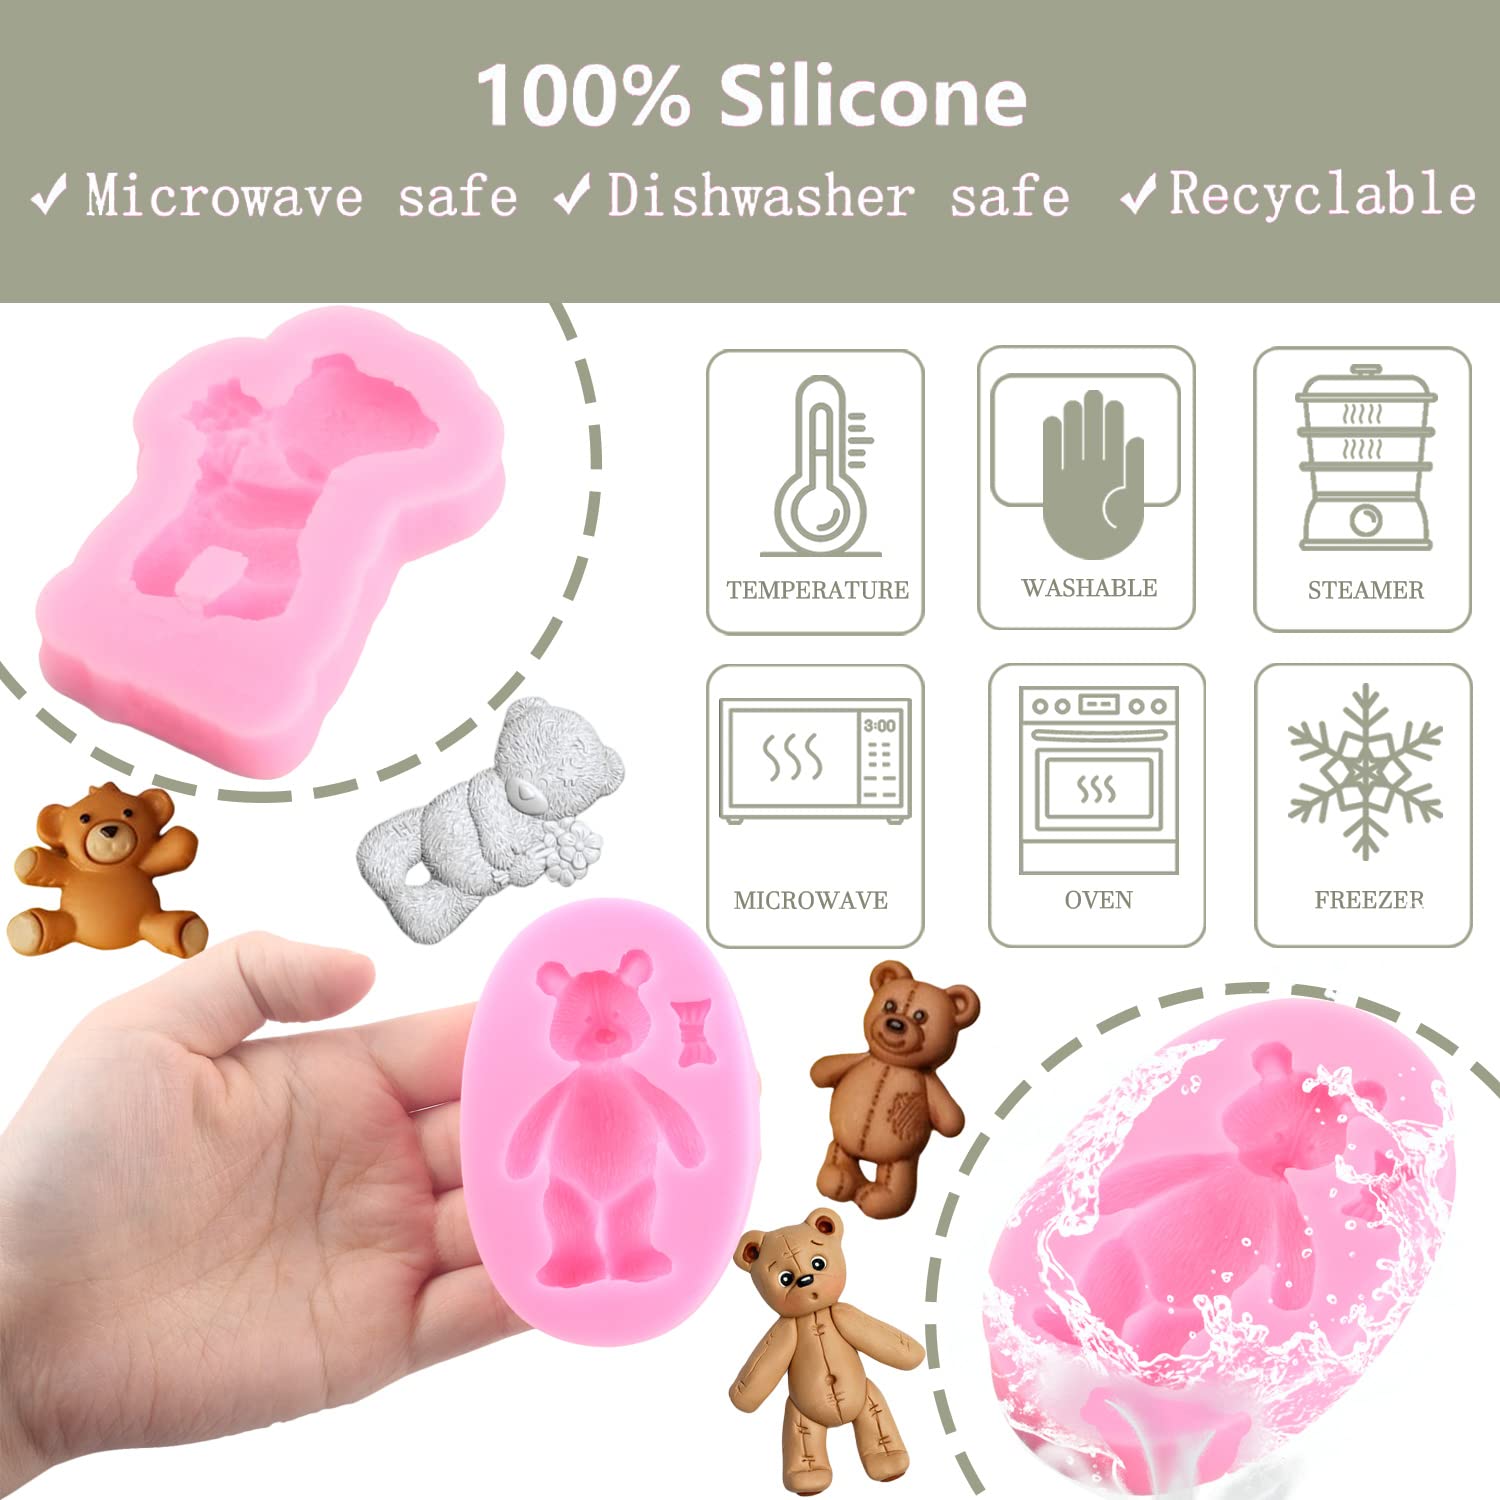 ZiXiang Bear Silicone Fondant Molds For Teddy Bears Chocolate Candy Gum Paste Crafting Polymer Clay Cake Decorating Set of 4